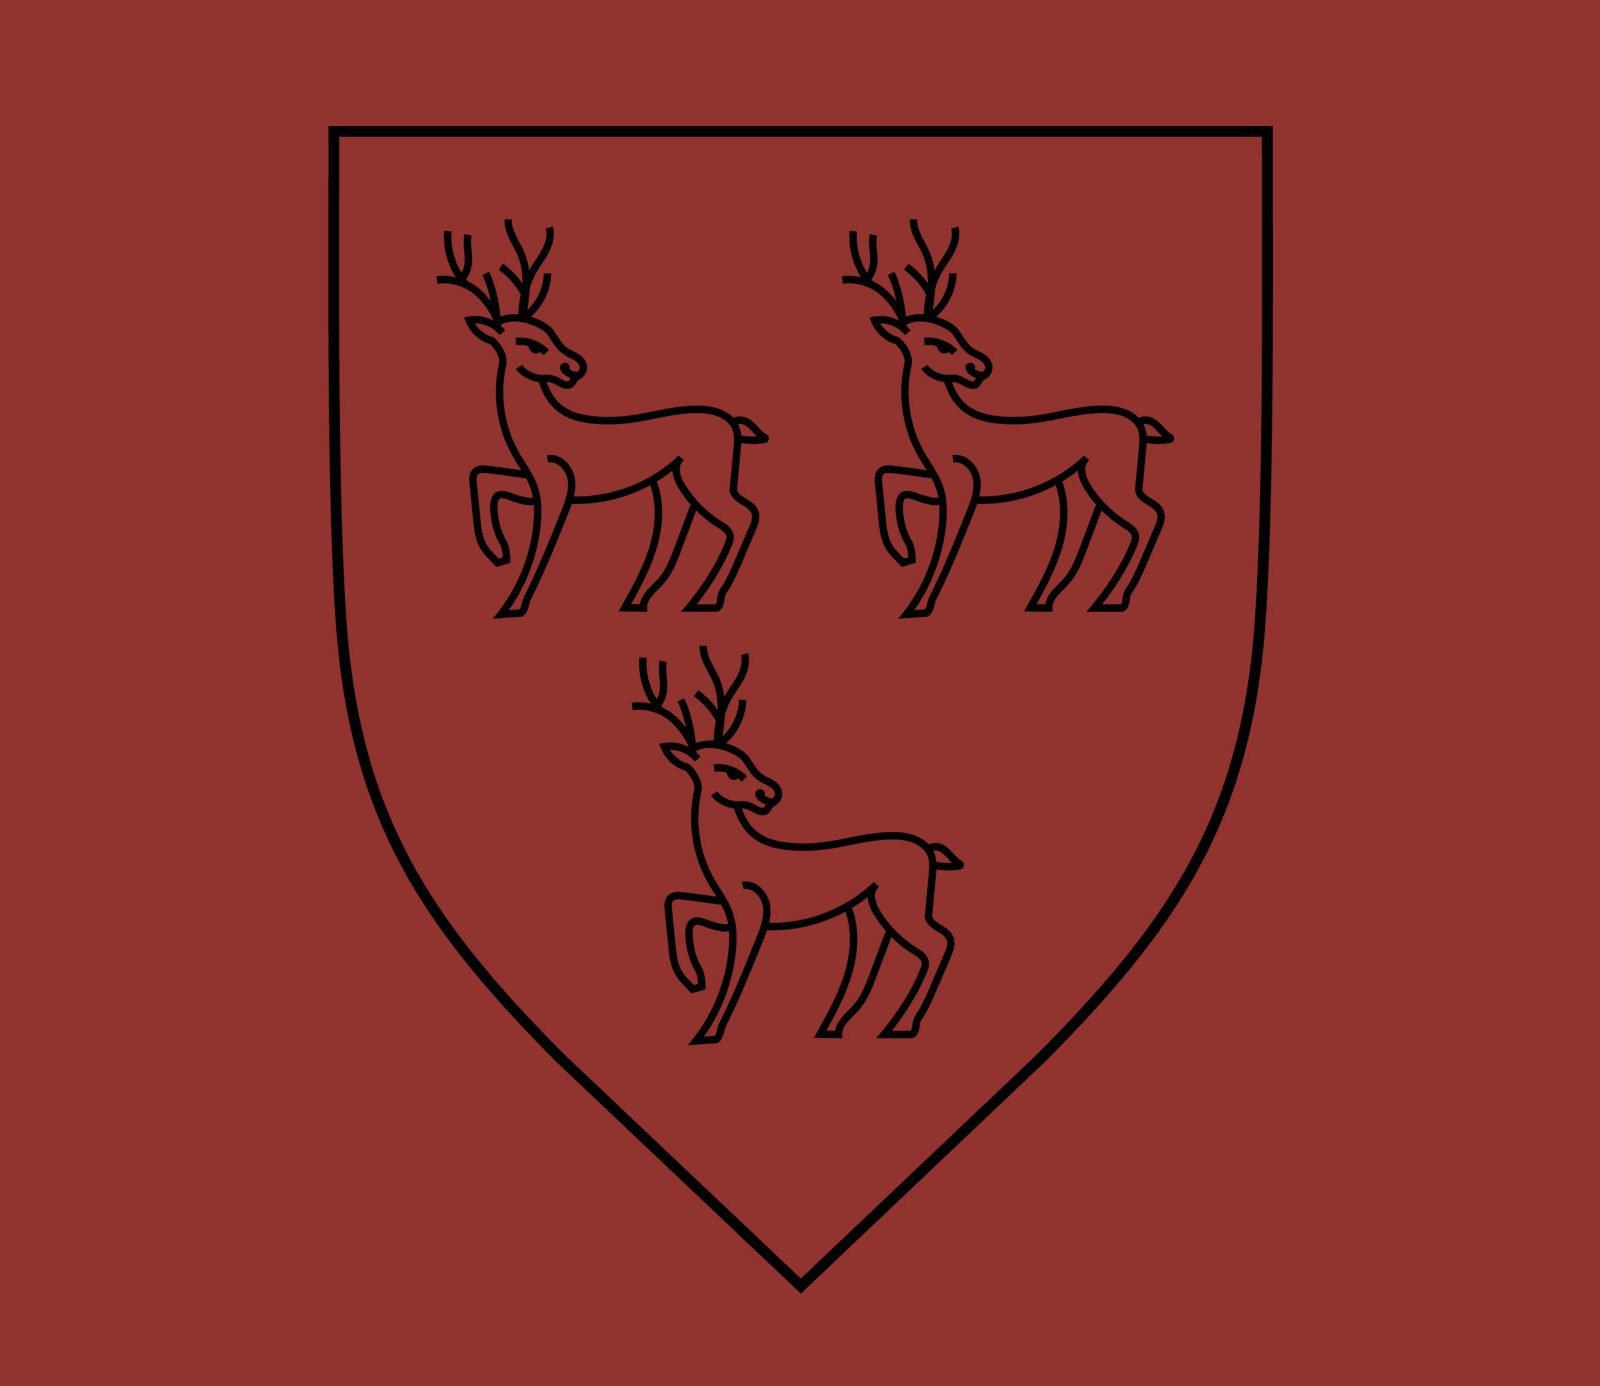 black drawing of a shield and roebucks on a red background